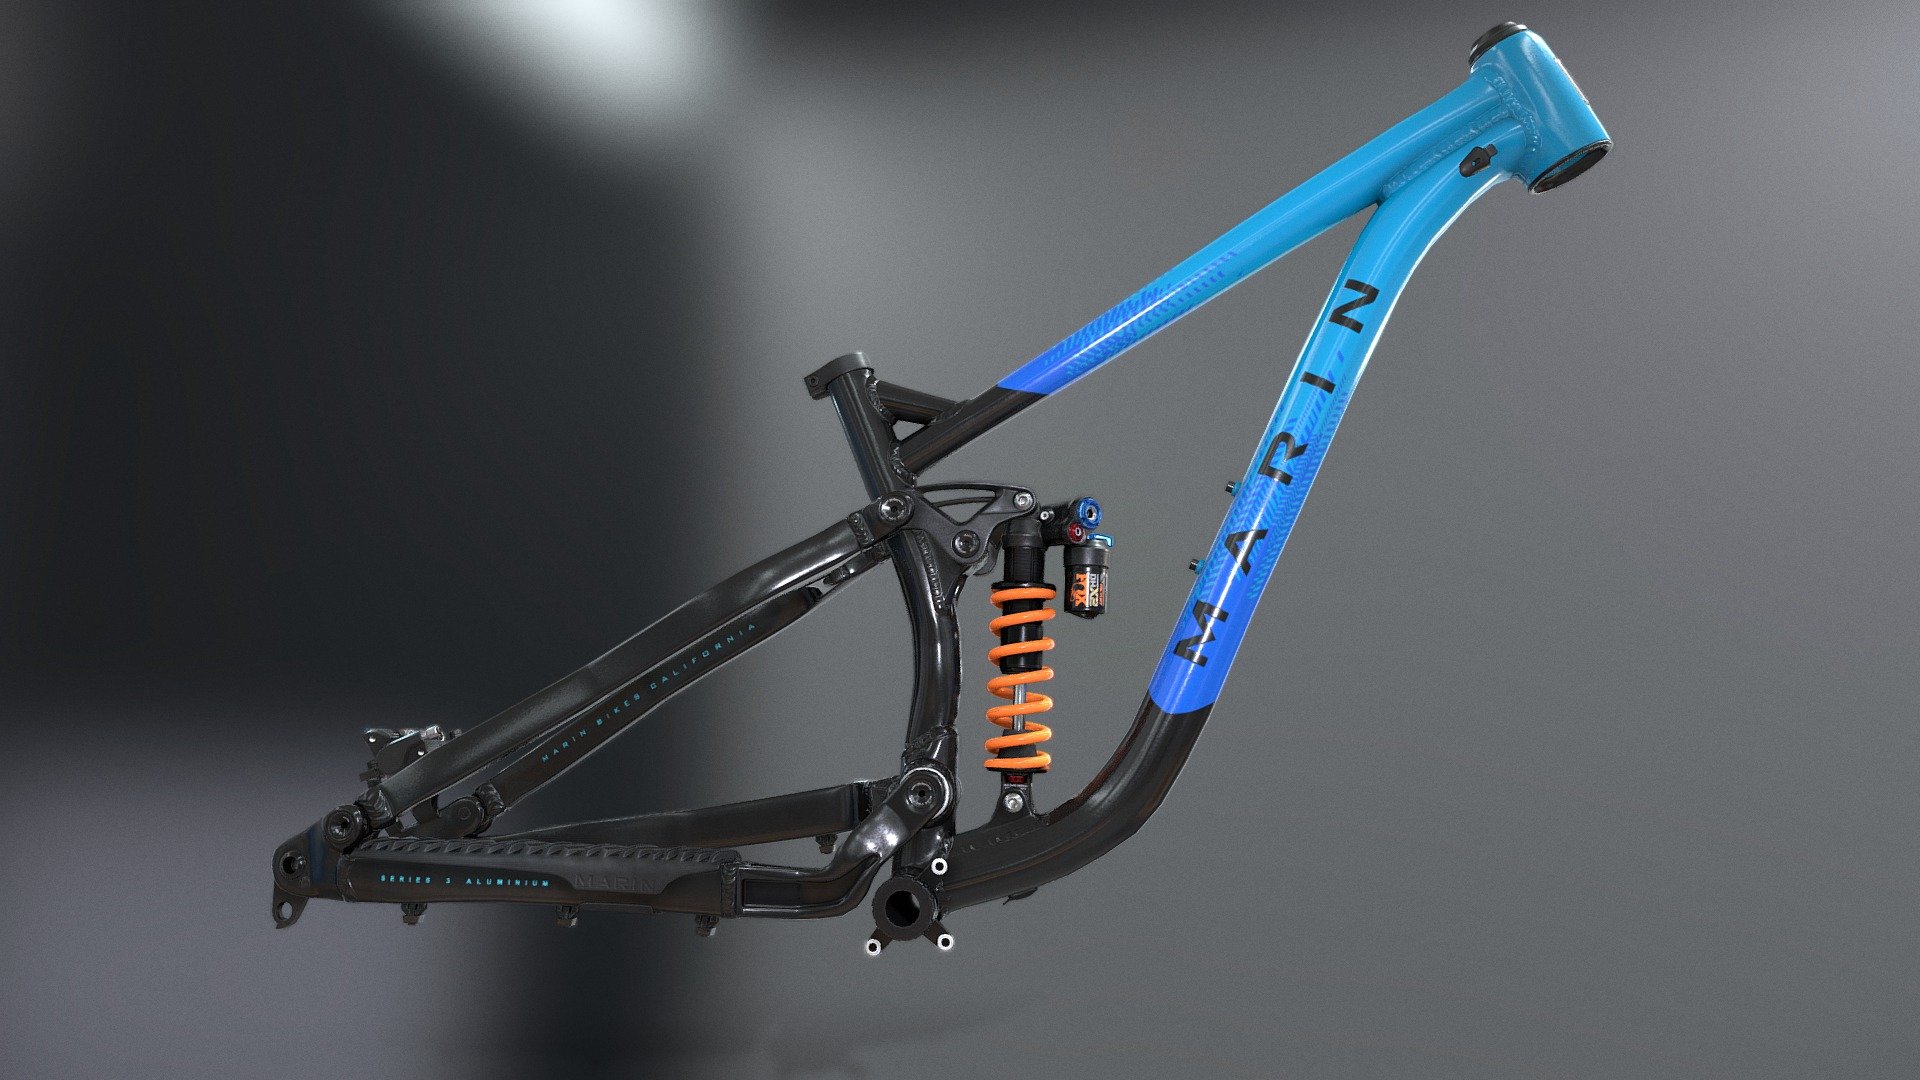 This is a 3d model of Marin mountain bike frame ready for using as full suspension trail enduro bikes. It is can be used as a MTB for downhill, enduro, trail, crosscountry in sports racing games and many other product rendering scenes.

This product is rigged and has a real accurate linkage driven mechanism.

This model is created in Blender and textured in Substance Painter. And also if someone who is a non Blender user buy this model I can provide this model in fbx,obj,3ds,dae,max,stl,ply and various other formats.

This model is made in real proportions.

High quality of PBR texture maps are available to download. 3d model